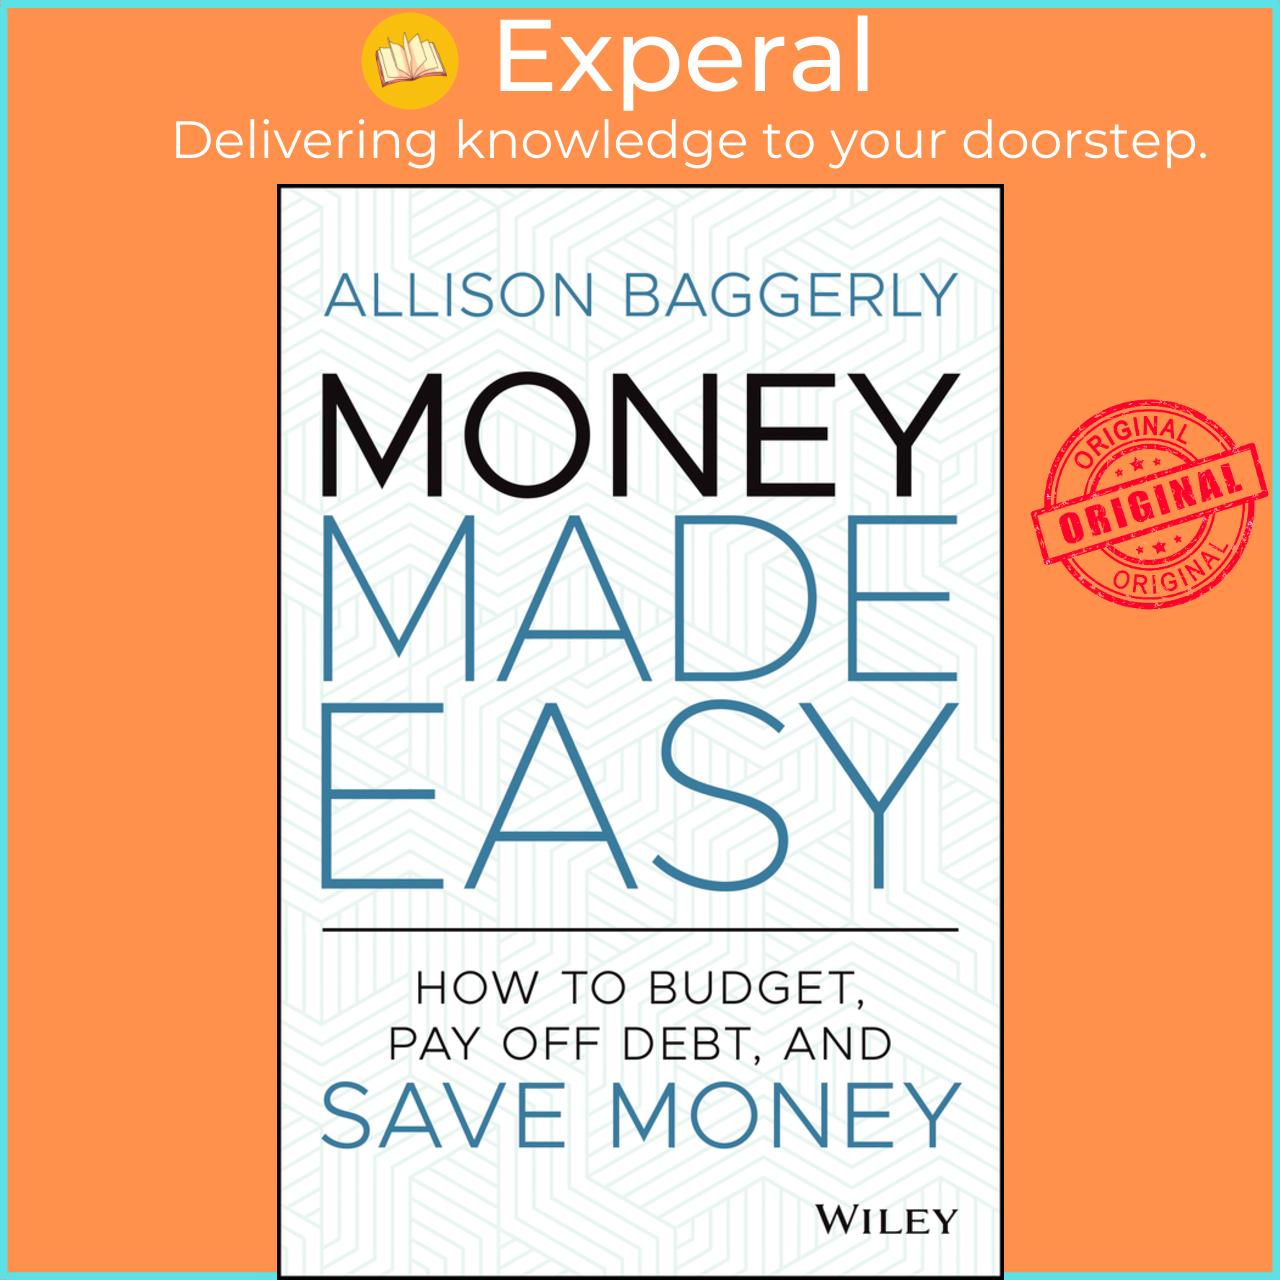 Sách - Money Made Easy - How to Budget, Pay Off Debt, and Save Money by Allison Baggerly (US edition, hardcover)